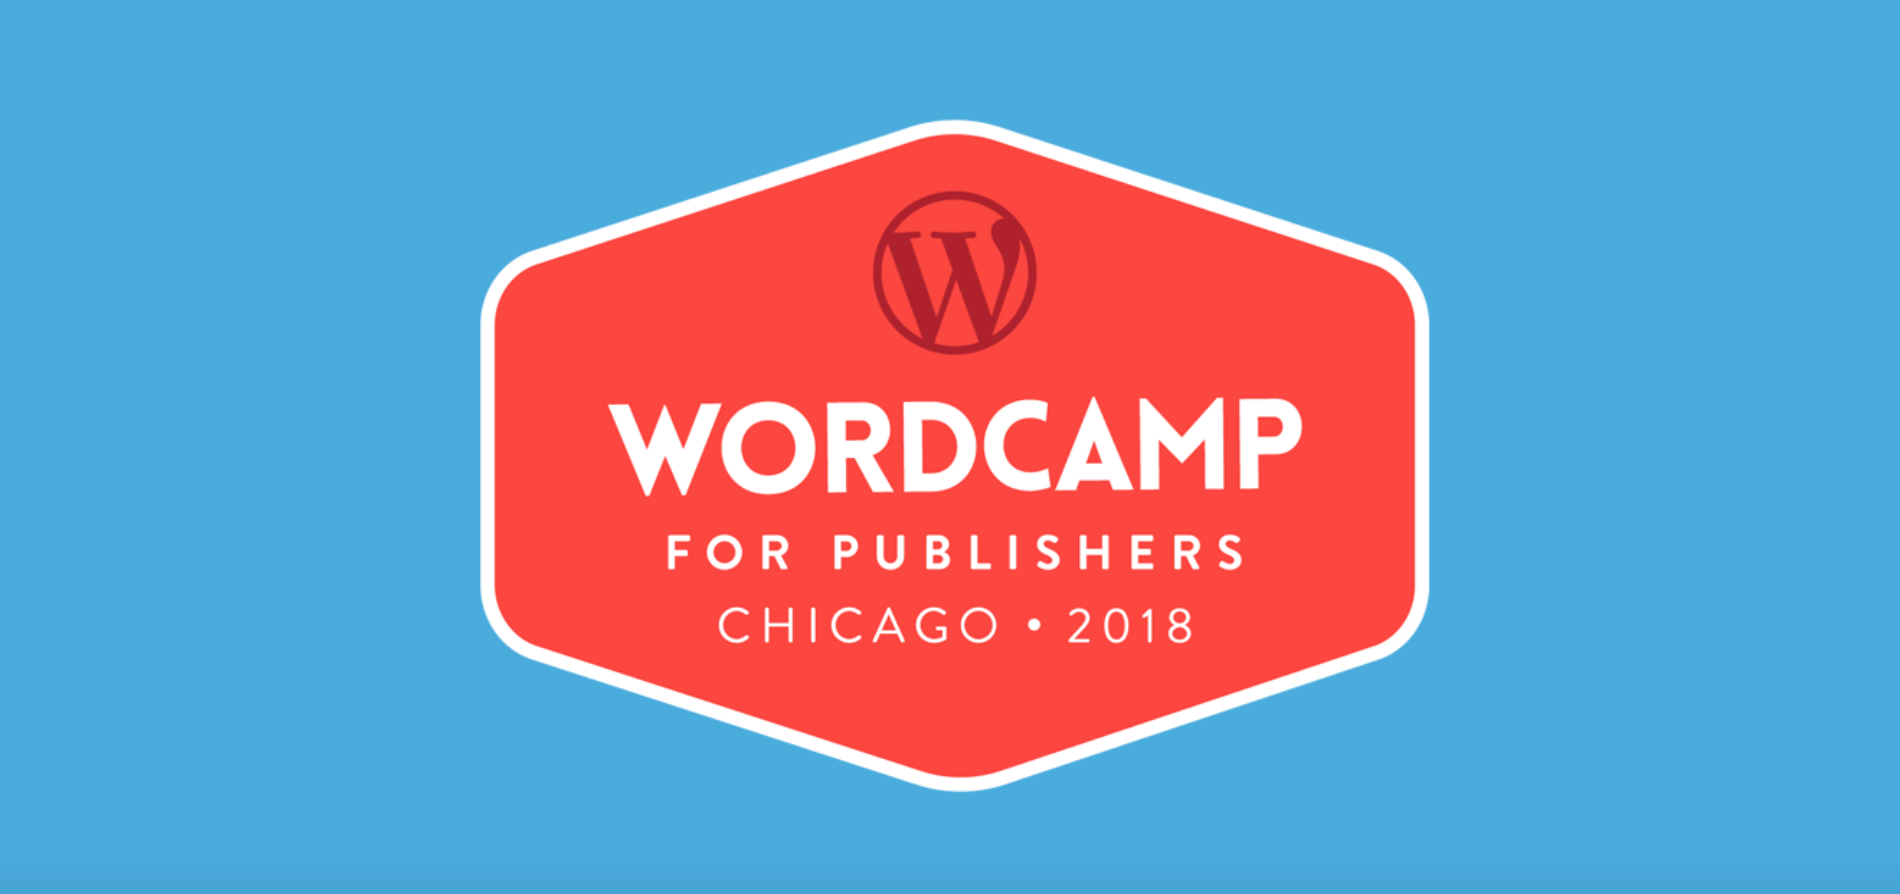 WordCamp for Publishers 2018 Videos Now Available on WordPress.tv